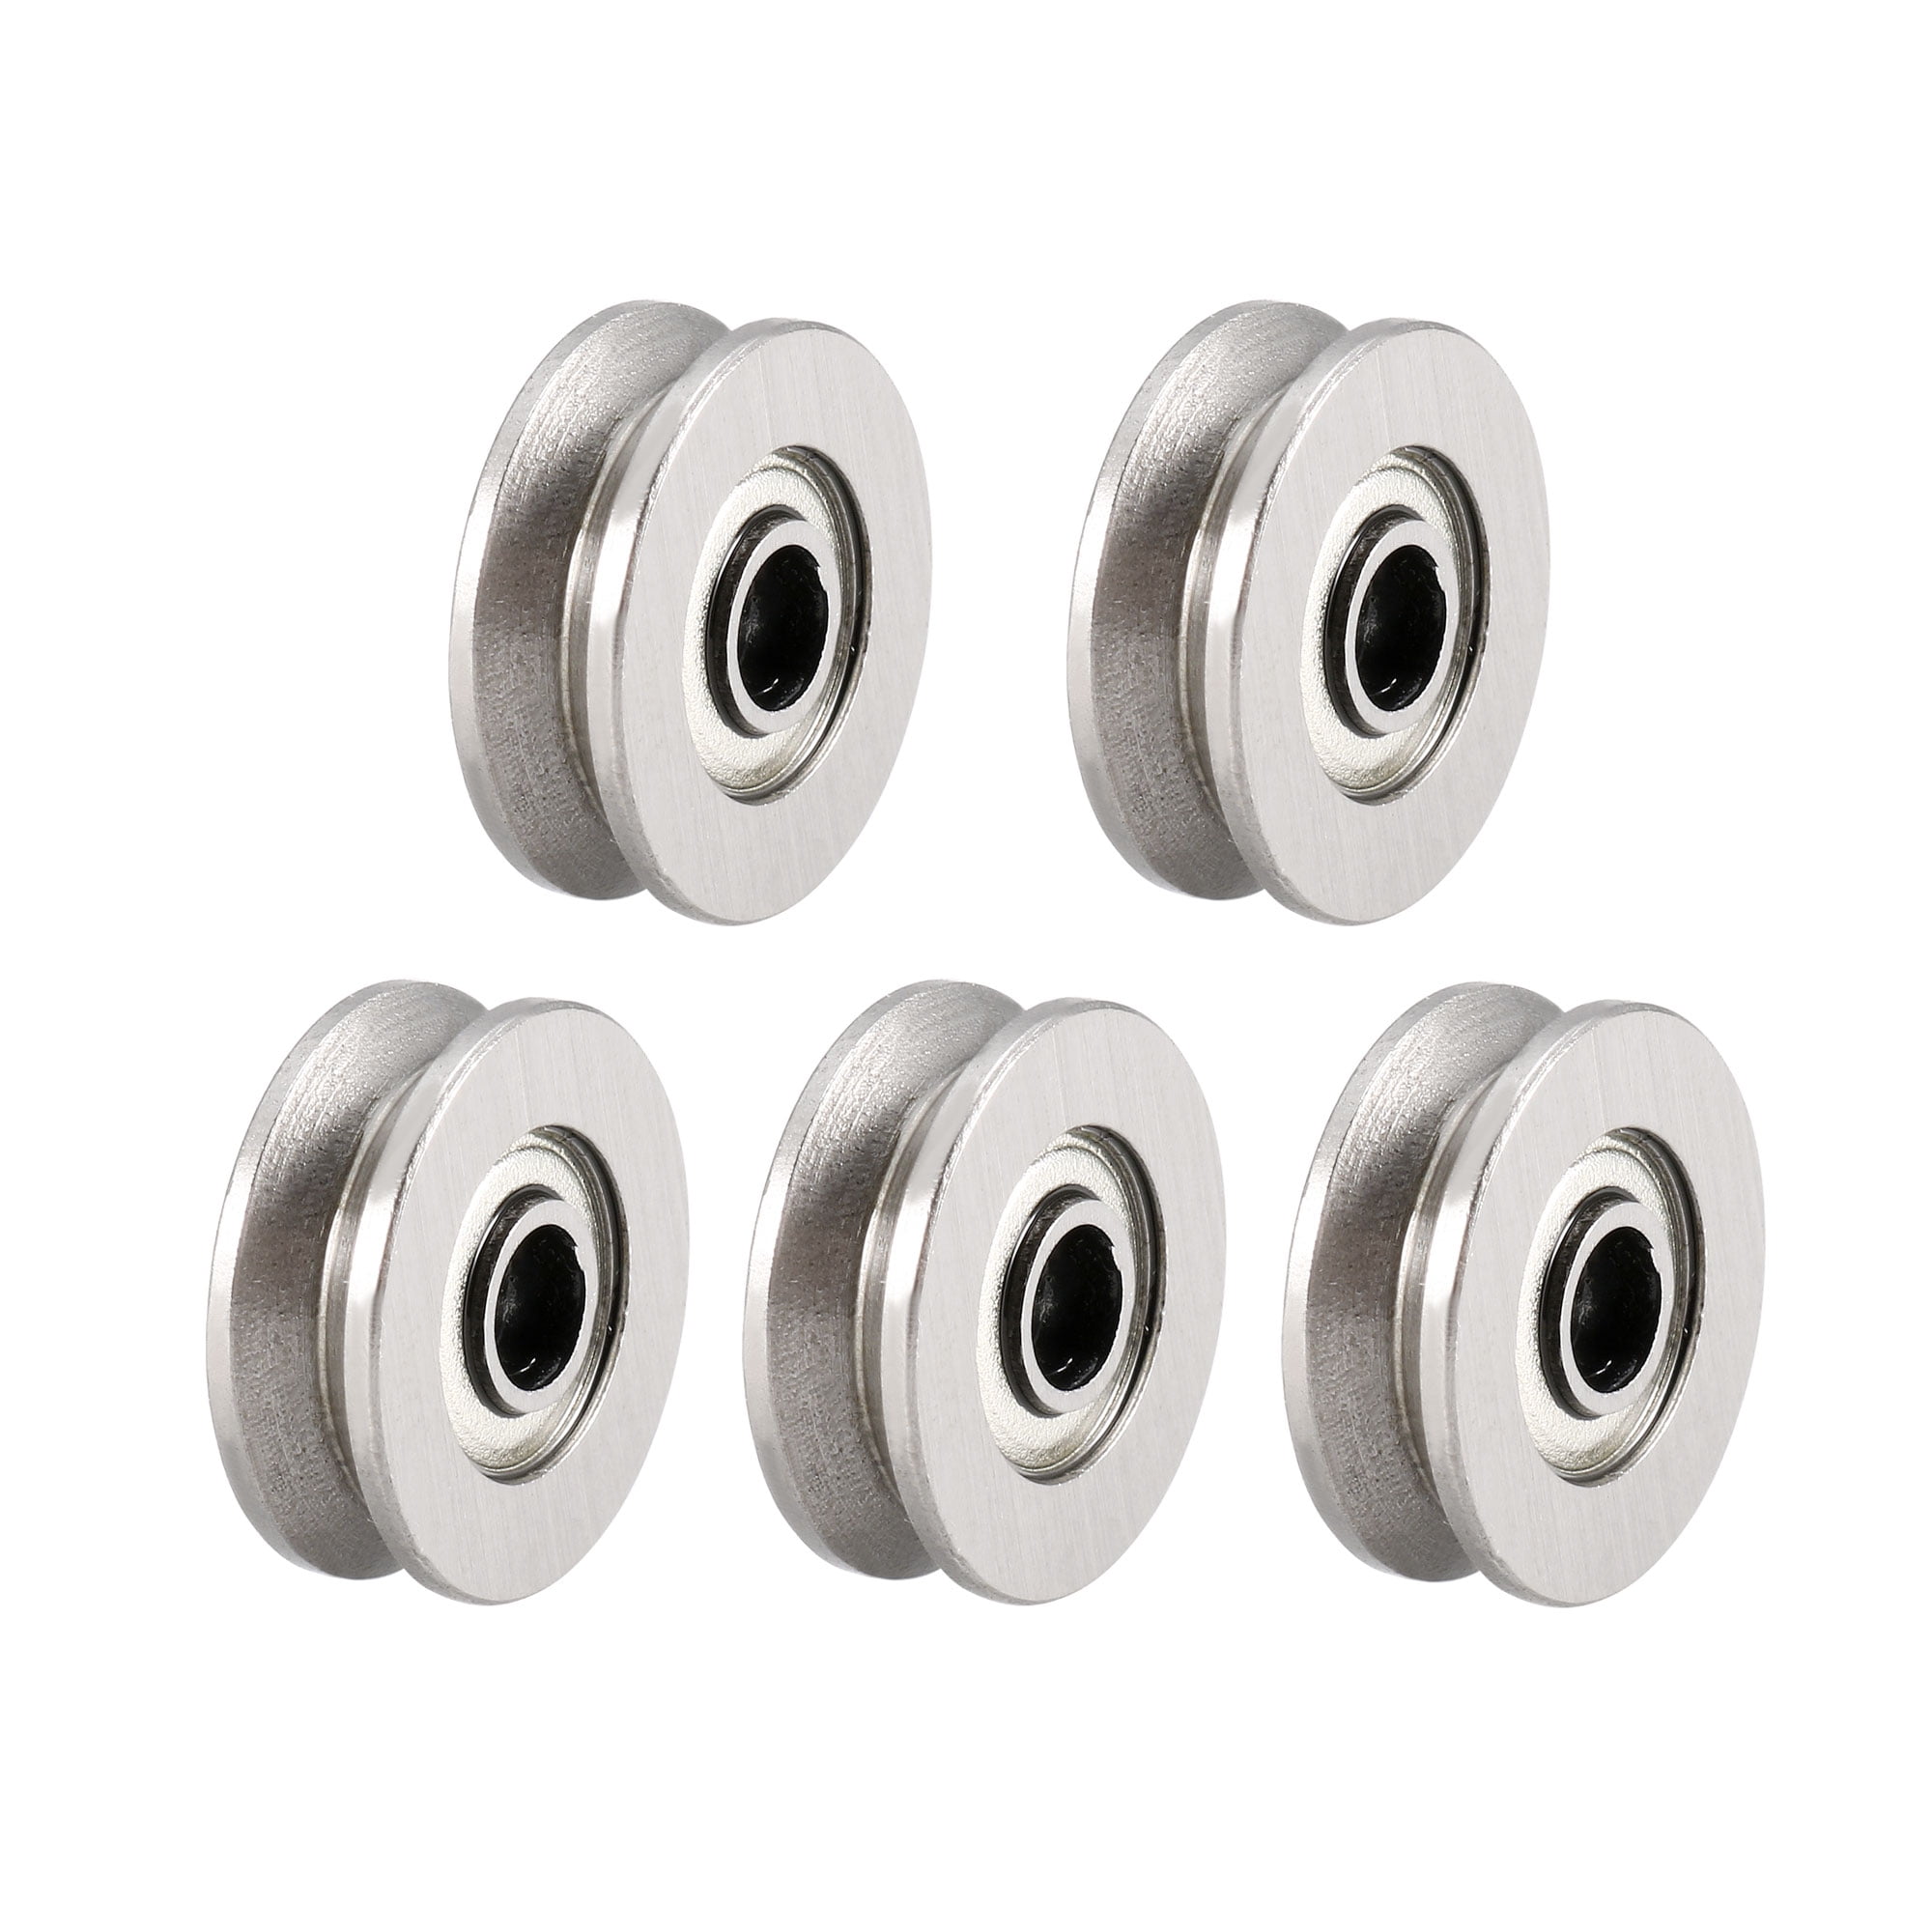 5Pcs Durable Single Pulley Roller Stainless Steel Bearing Supply+Sturdy Hardware 